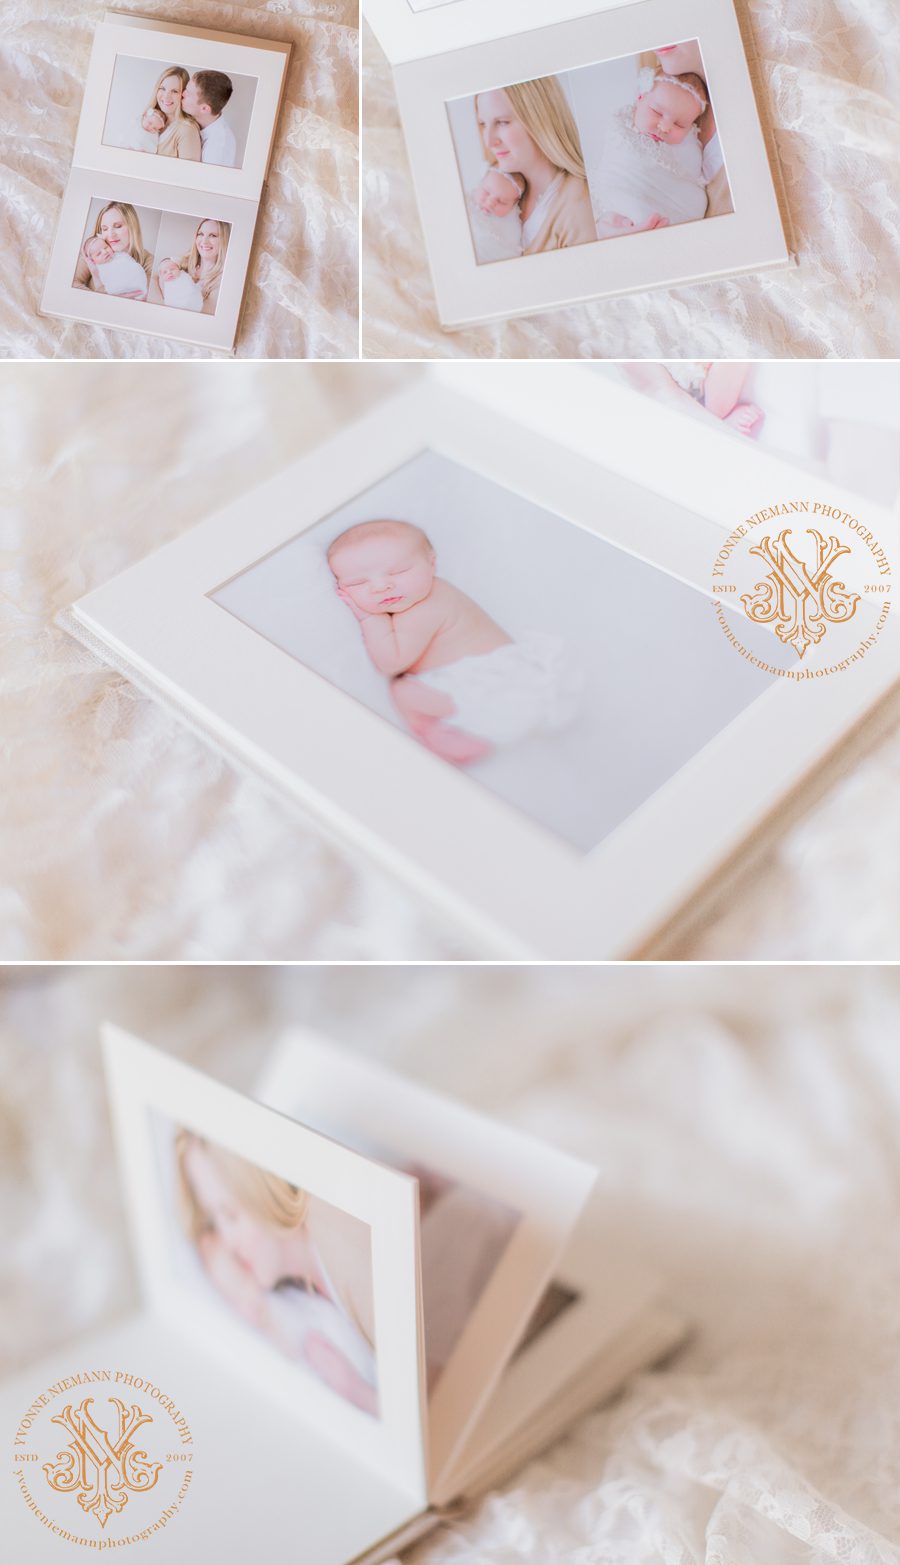 Petite matted album of newborn photos offered by Athens, GA baby photographer, Yvonne Niemann.